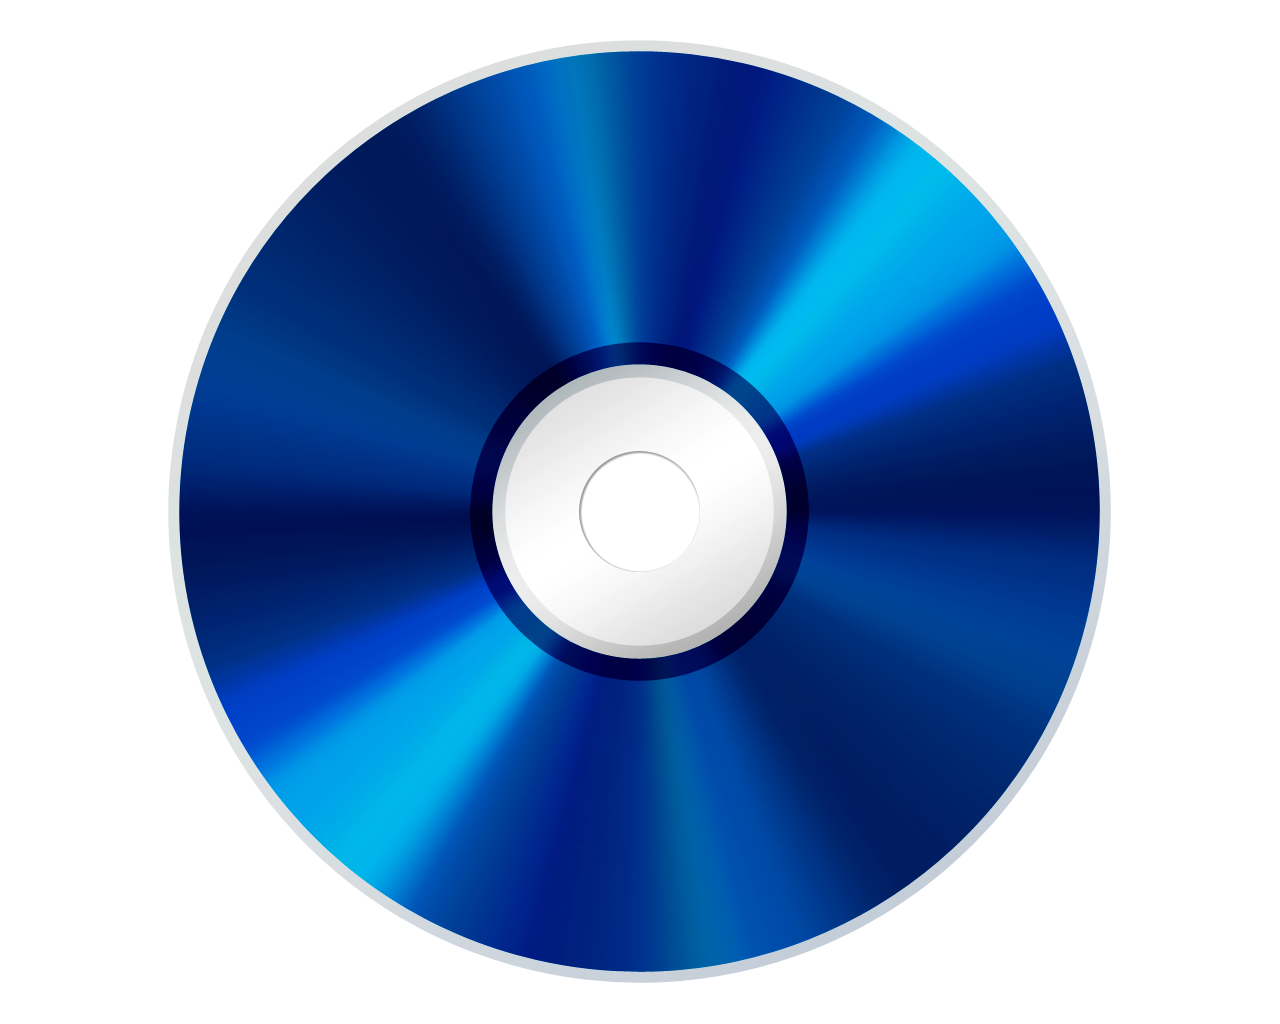 DVD PNG HD Images